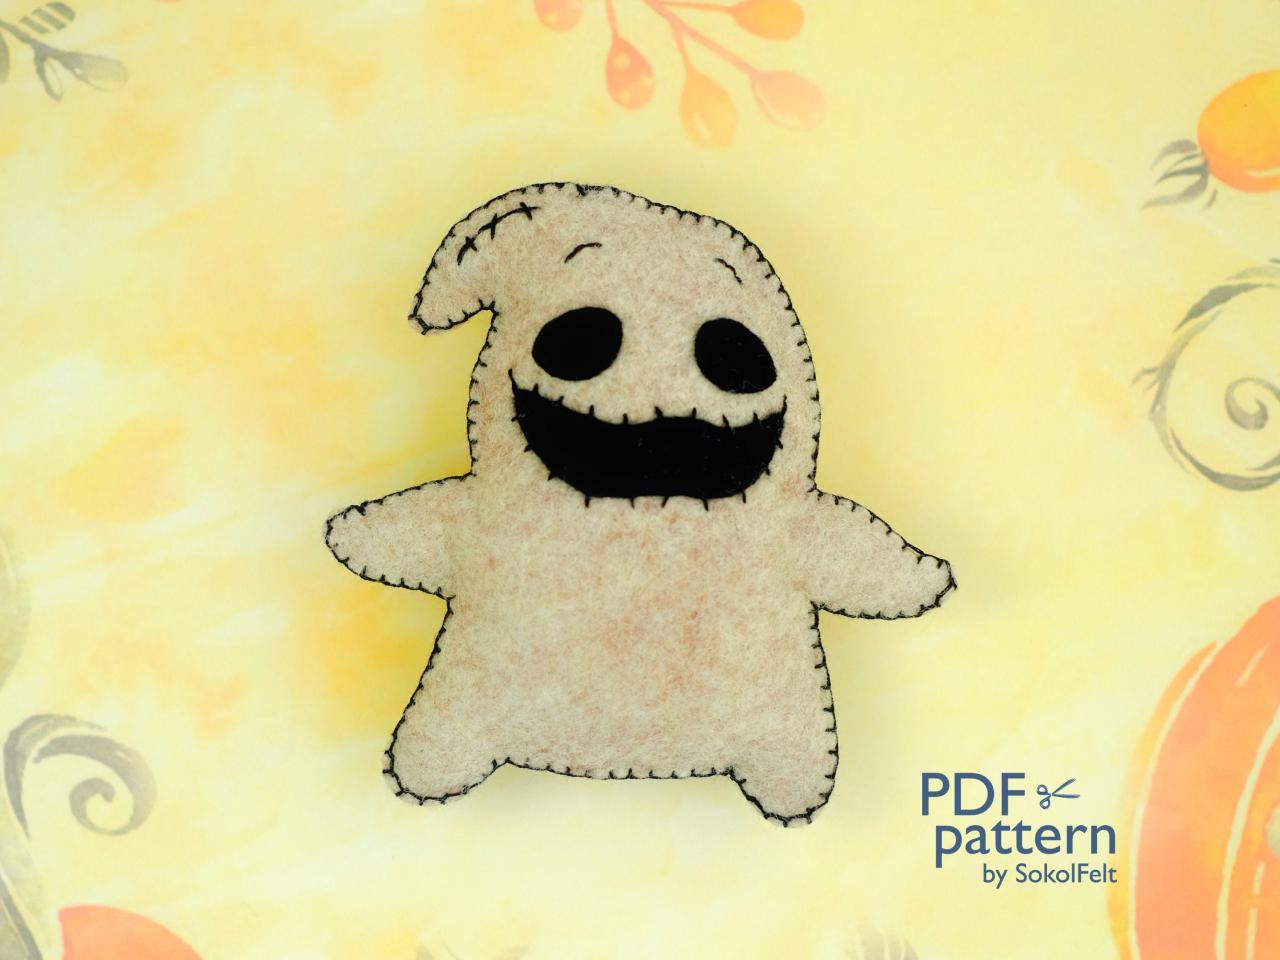 Felt Oogie Boogie Toy Sewing Pdf Pattern, Nightmare Before Christmas, Easy To Make Halloween Toy